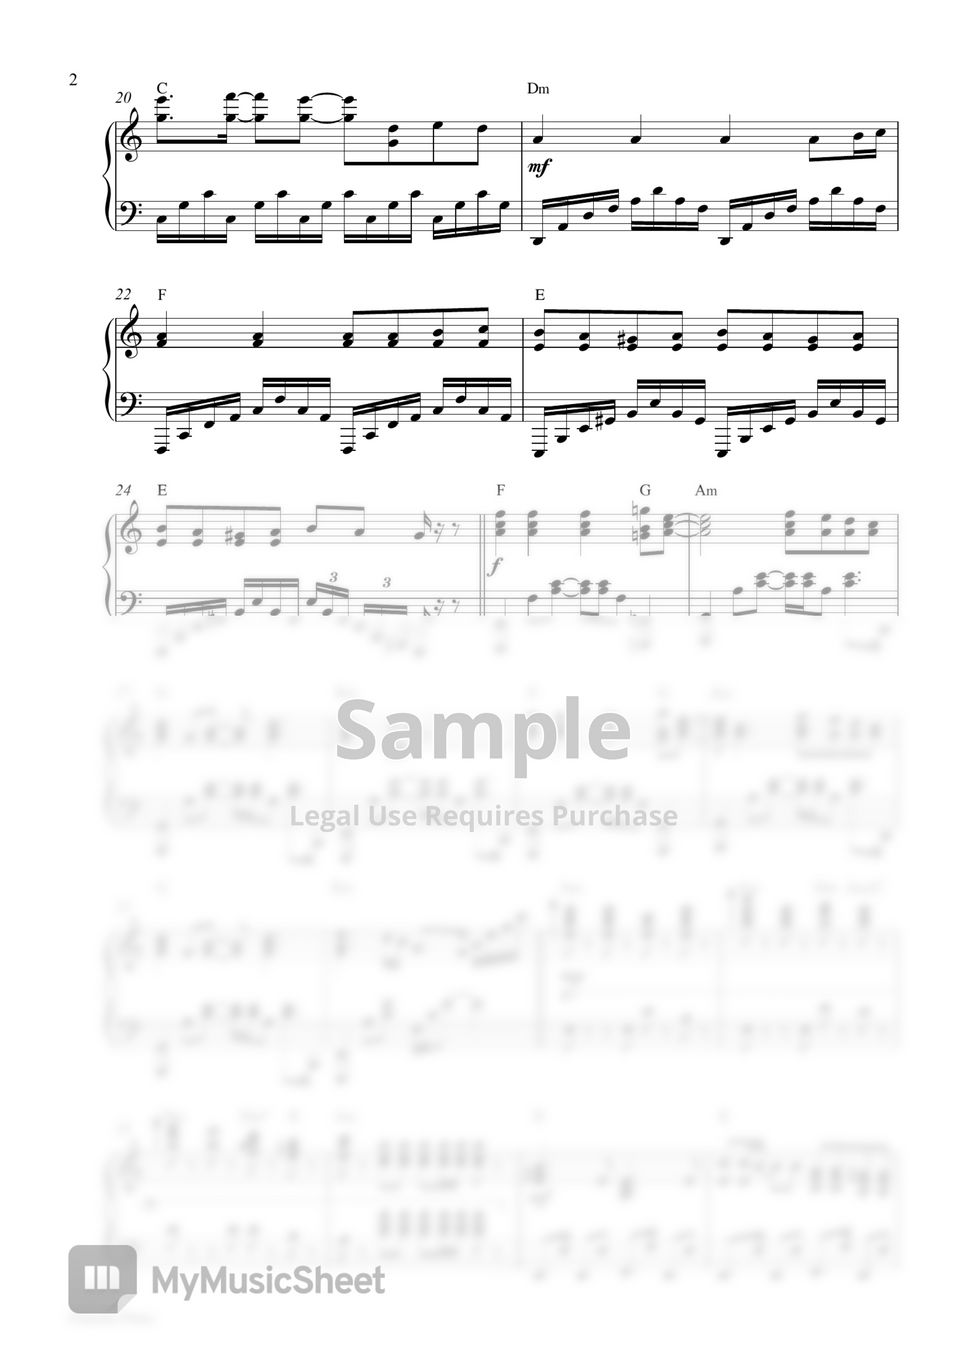 Lady Gaga - Bloody Mary (Piano Sheet - Special Price) by Pianella Piano